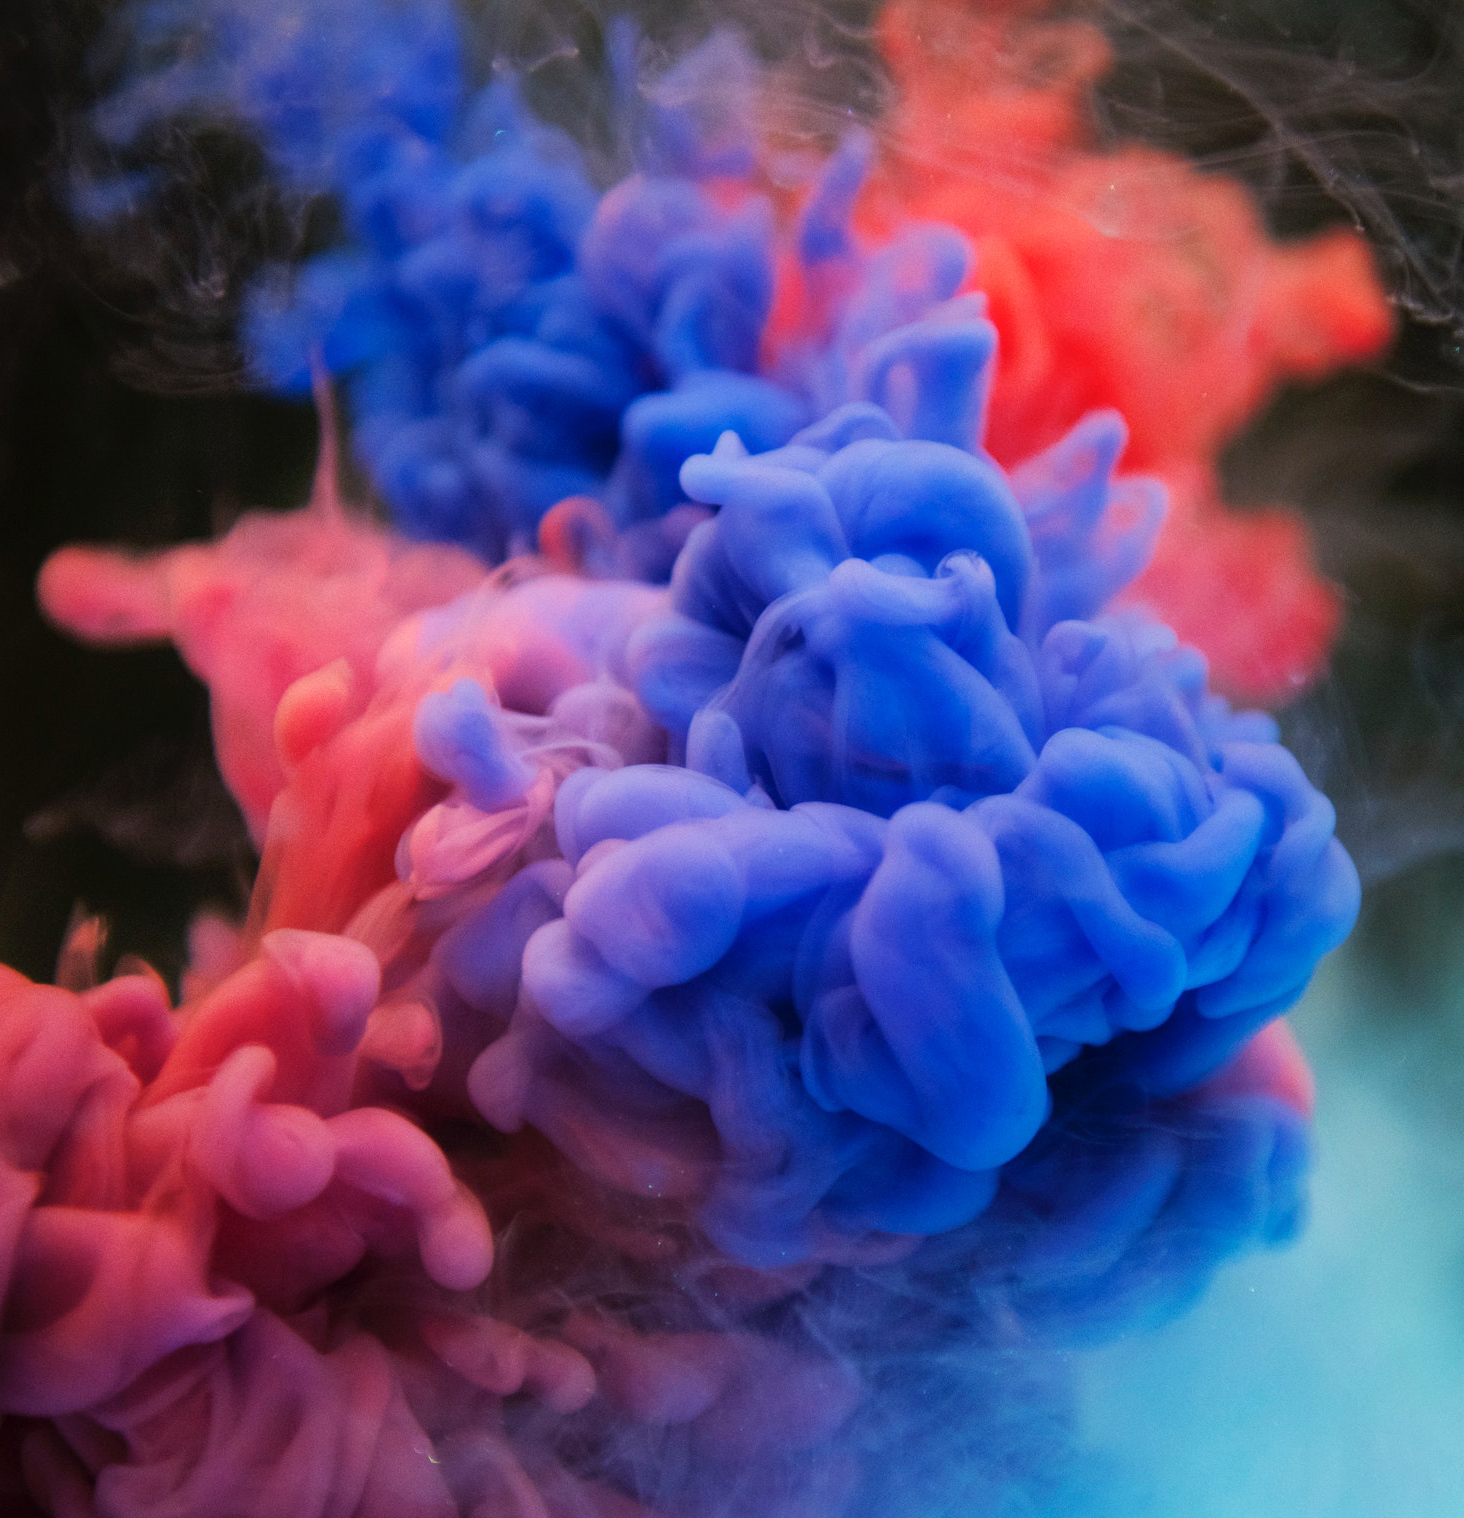 Photograph of swirling pink, blue and red smoke